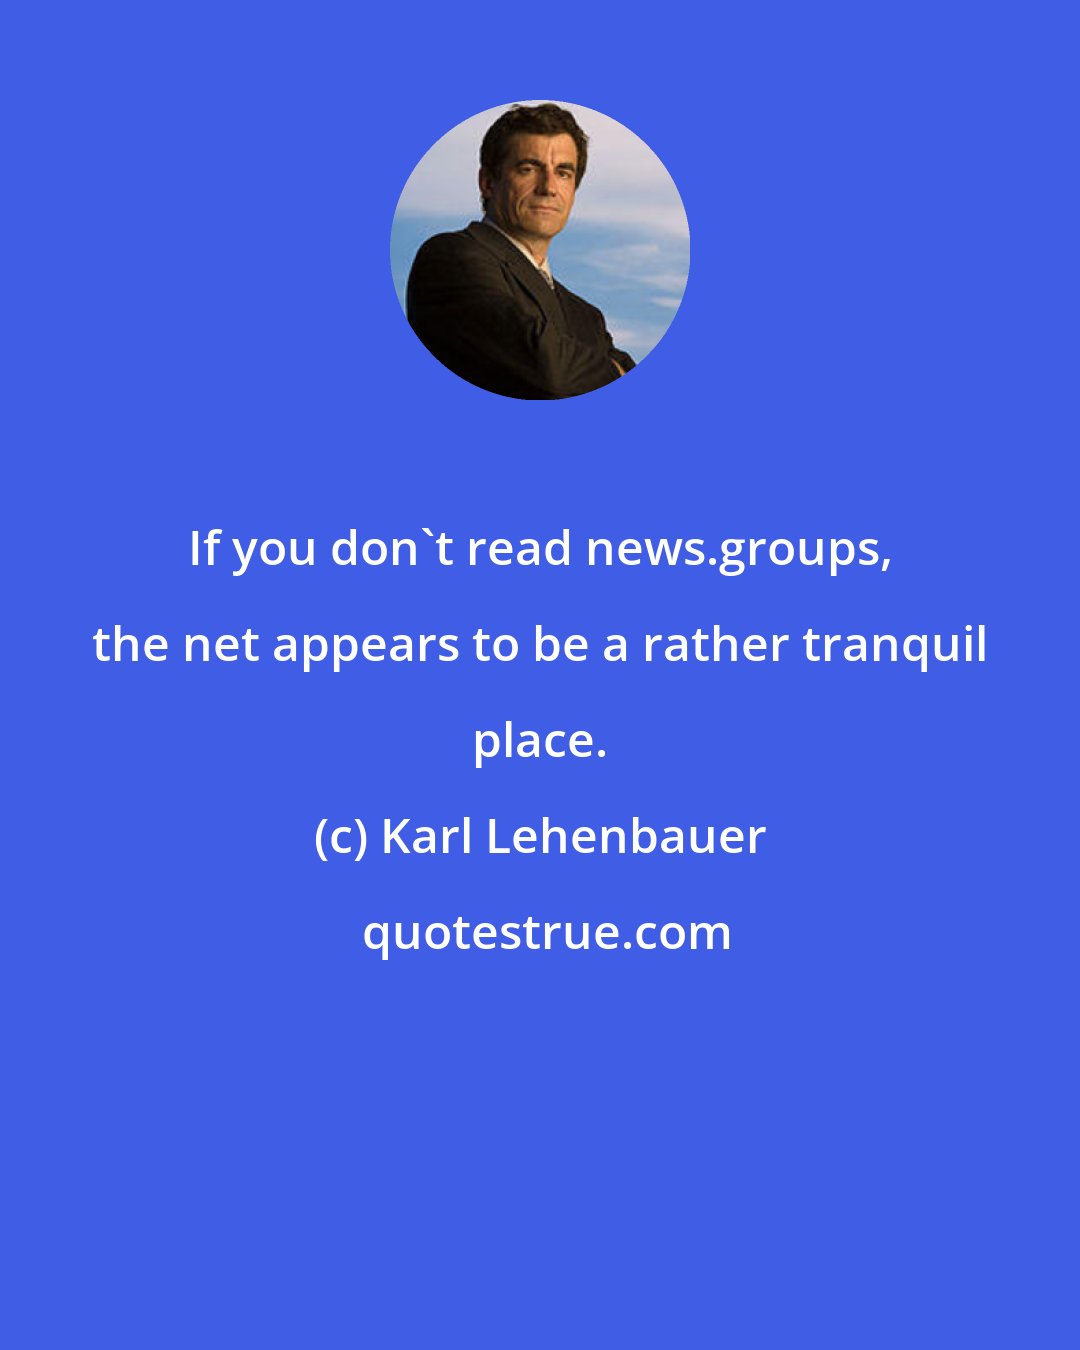 Karl Lehenbauer: If you don't read news.groups, the net appears to be a rather tranquil place.